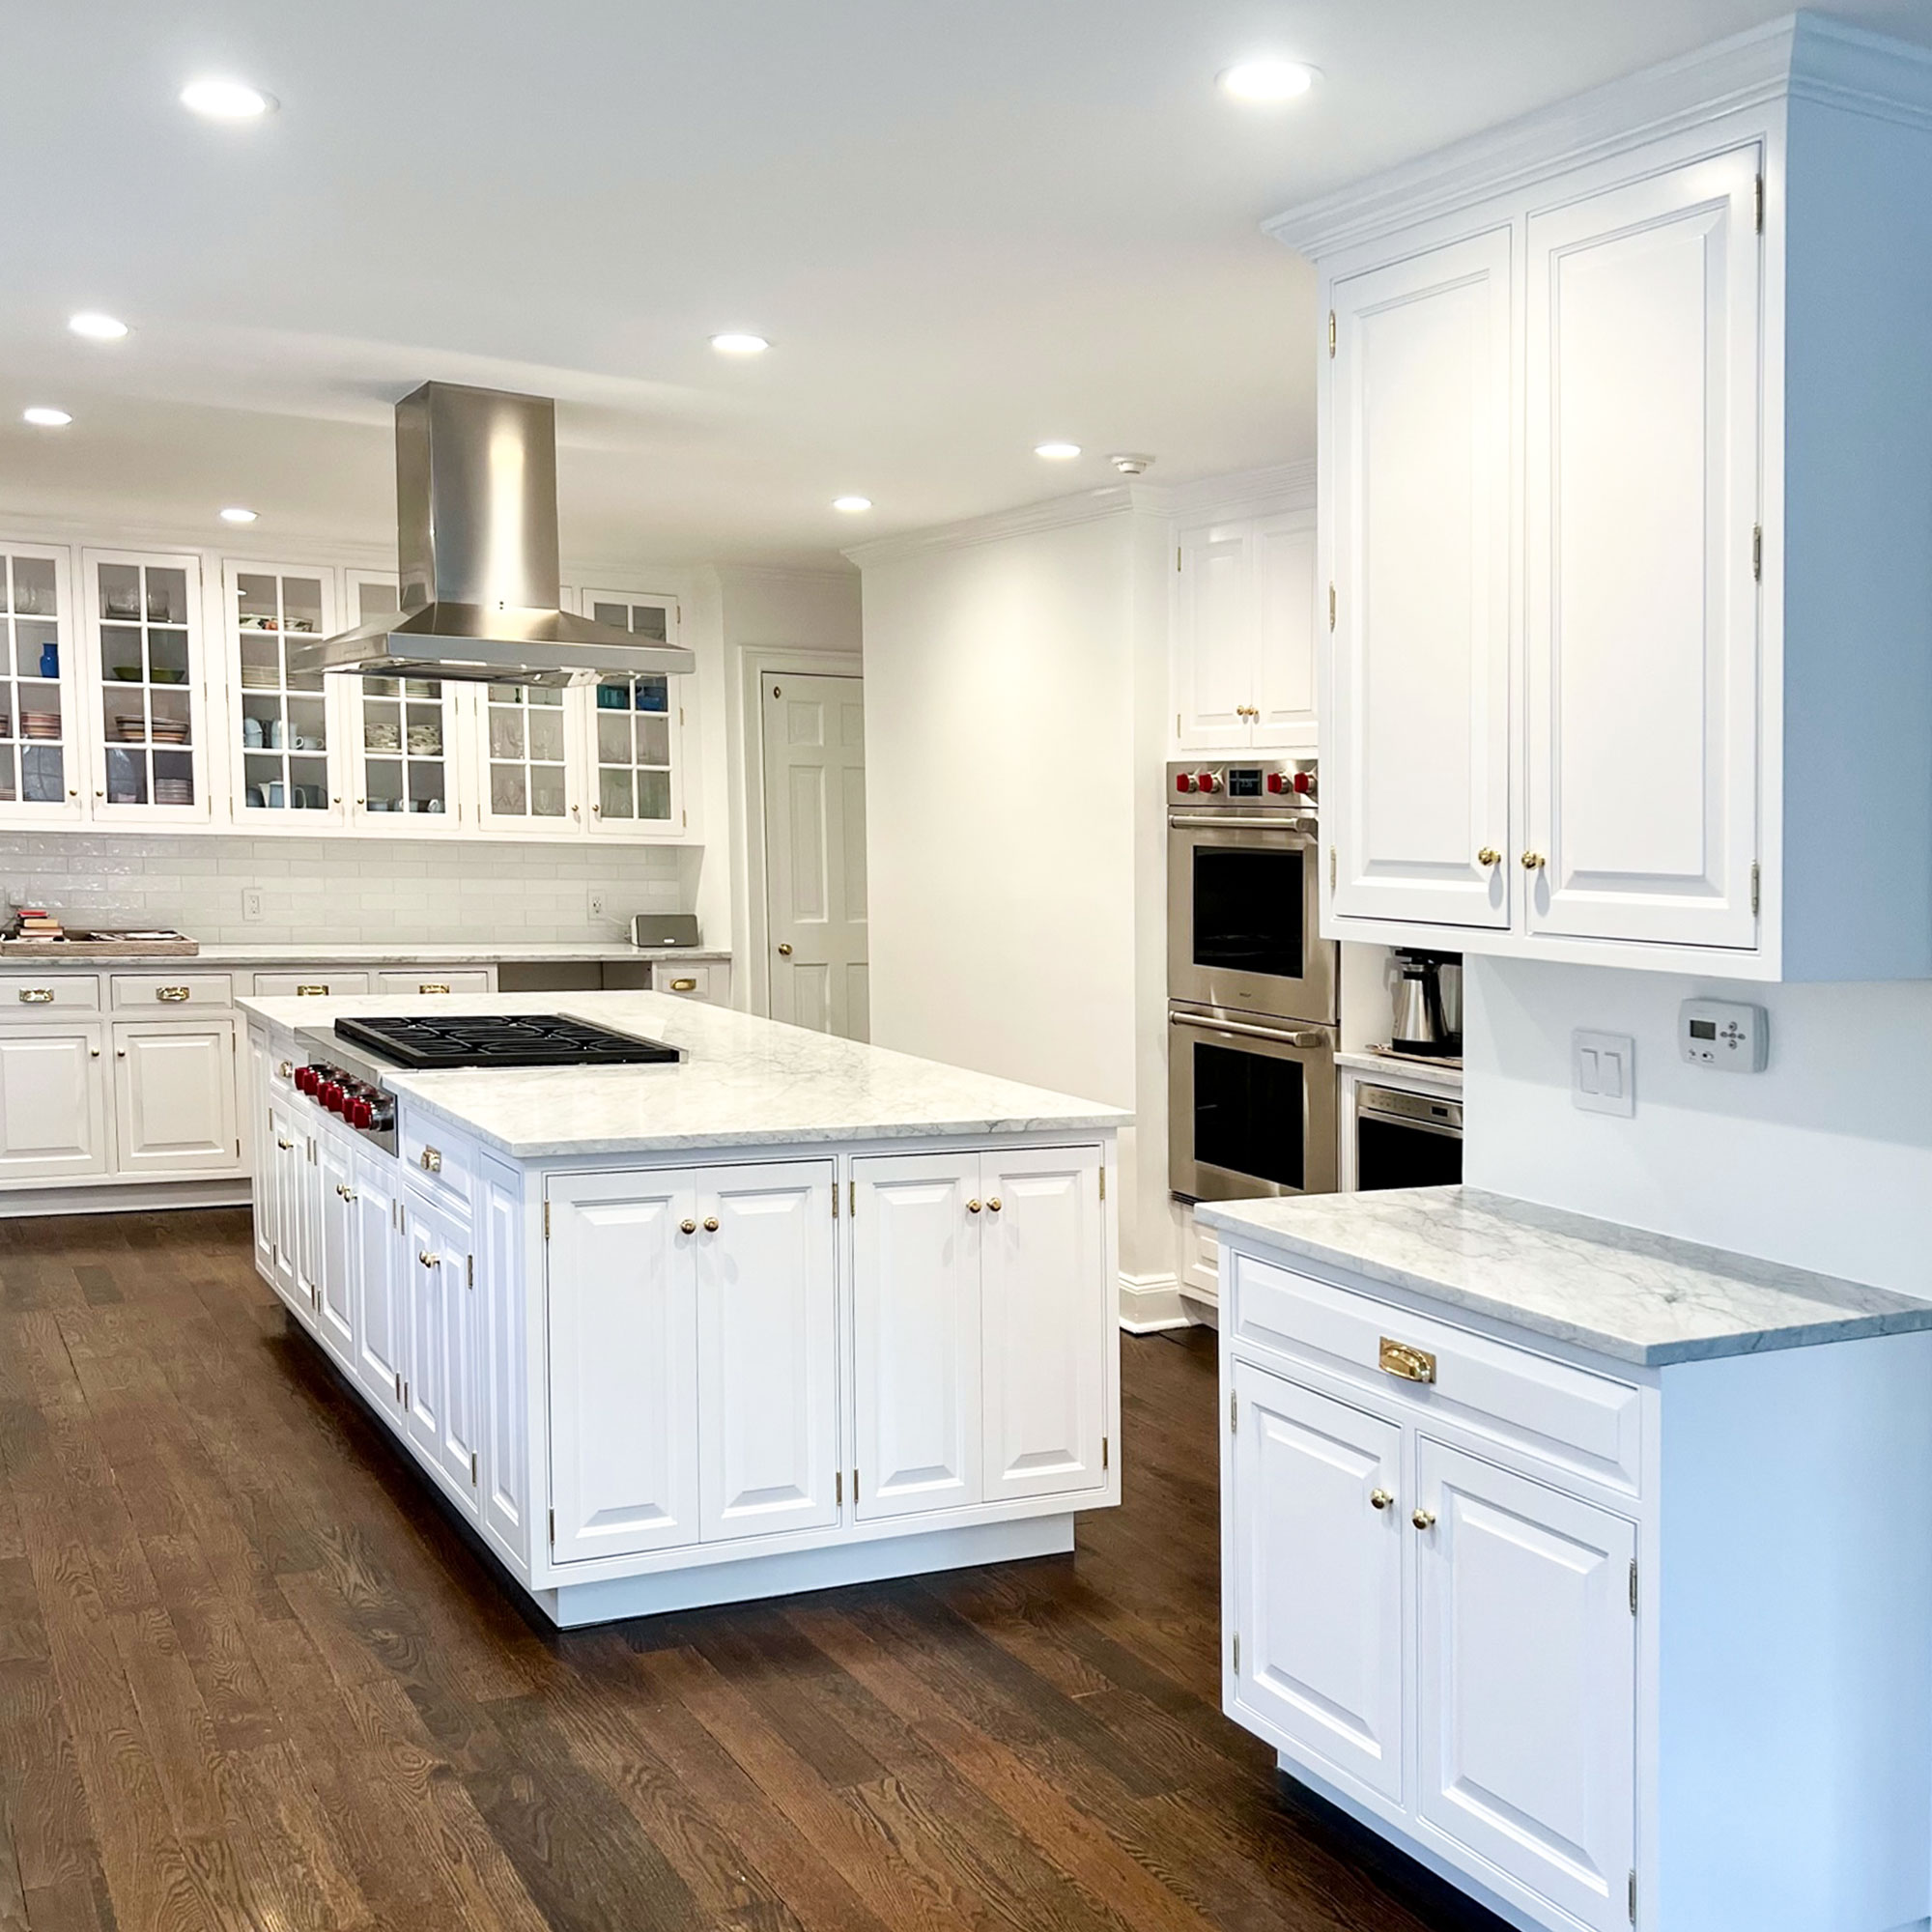 New-Canaan-Kitchen-After-11